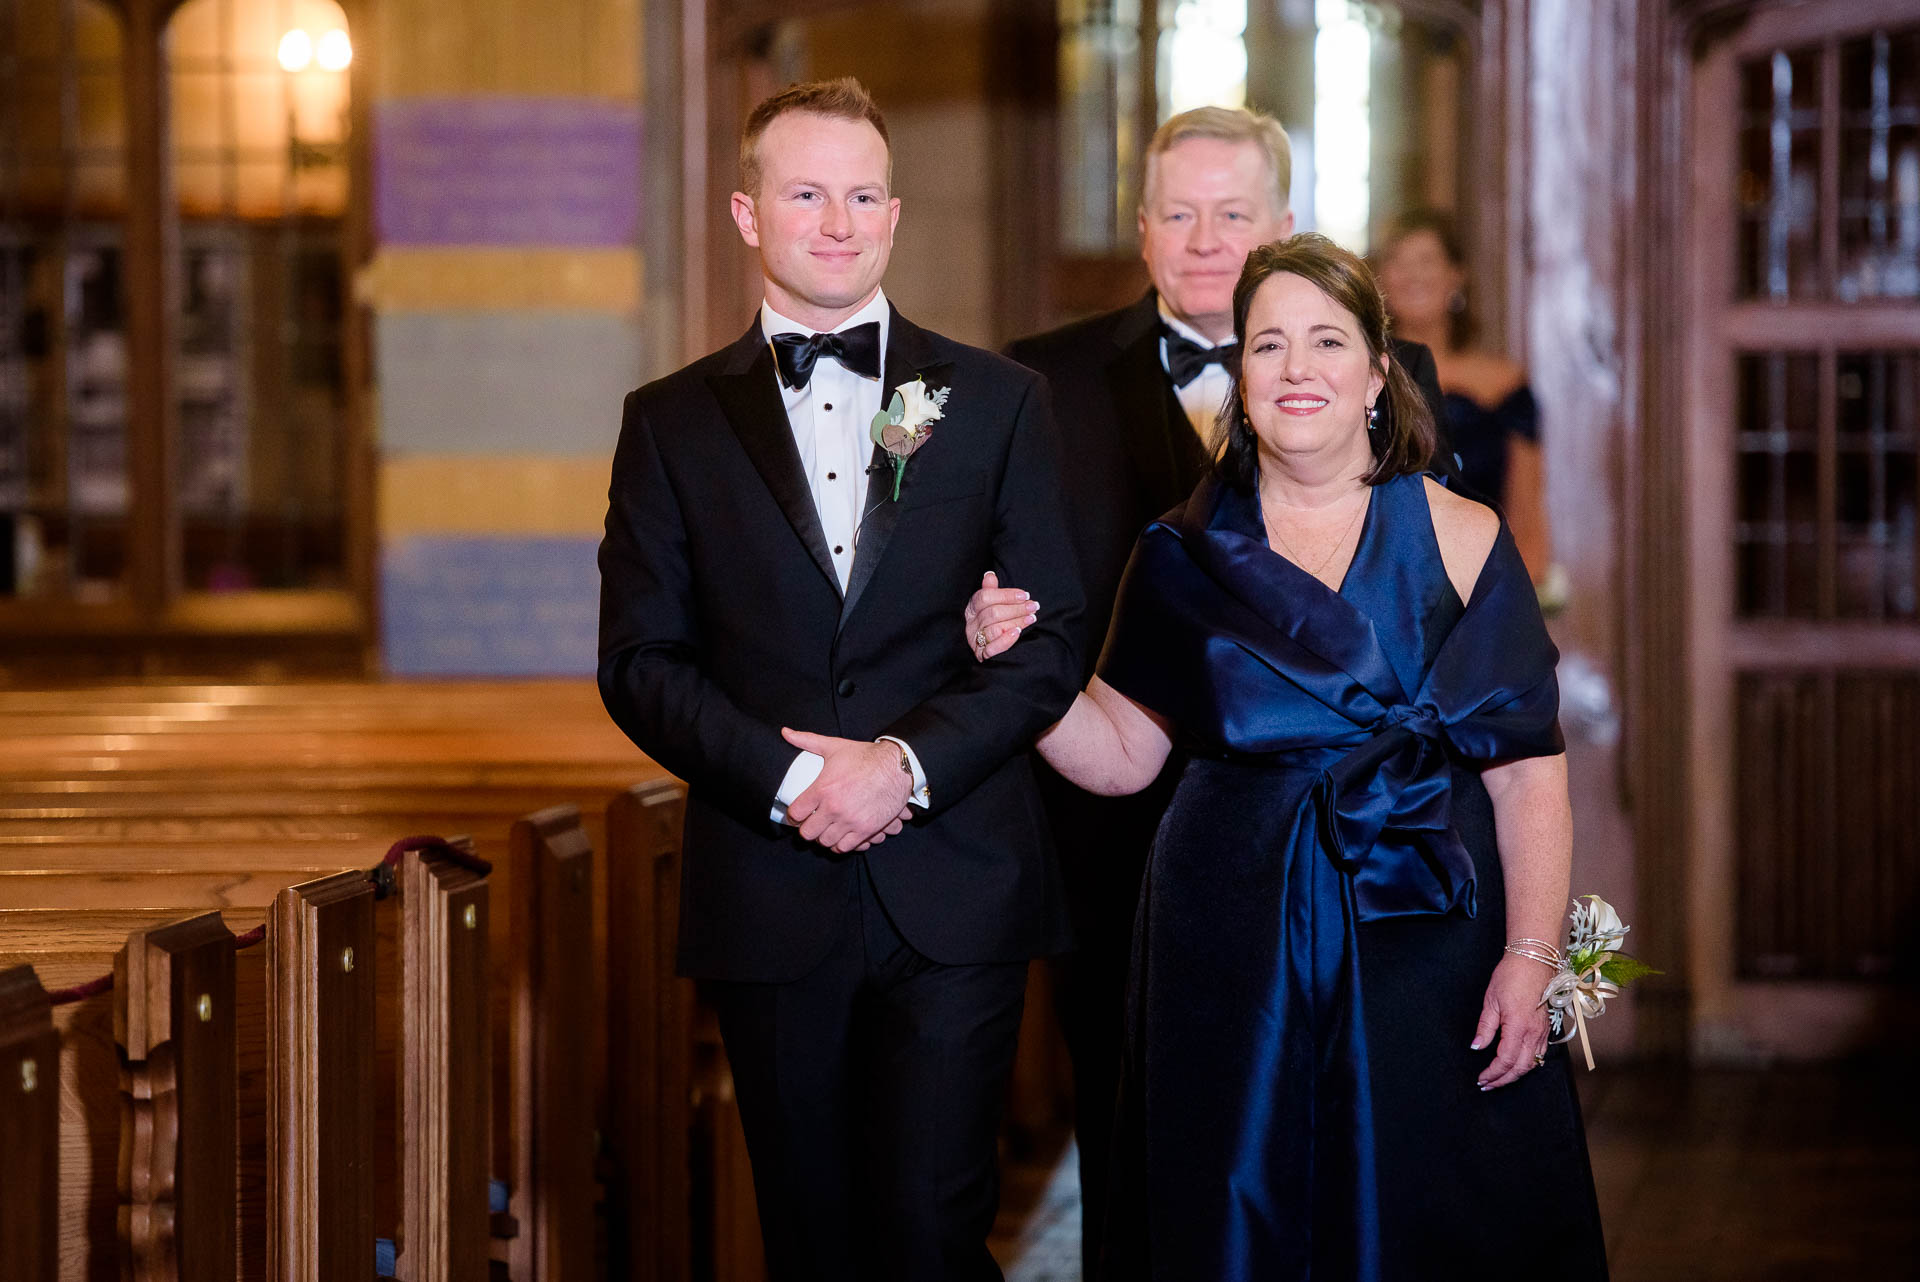 Groom and mother walk down the aisle during a wedding ceremony at Fourth Presbyterian Church in Chicago.